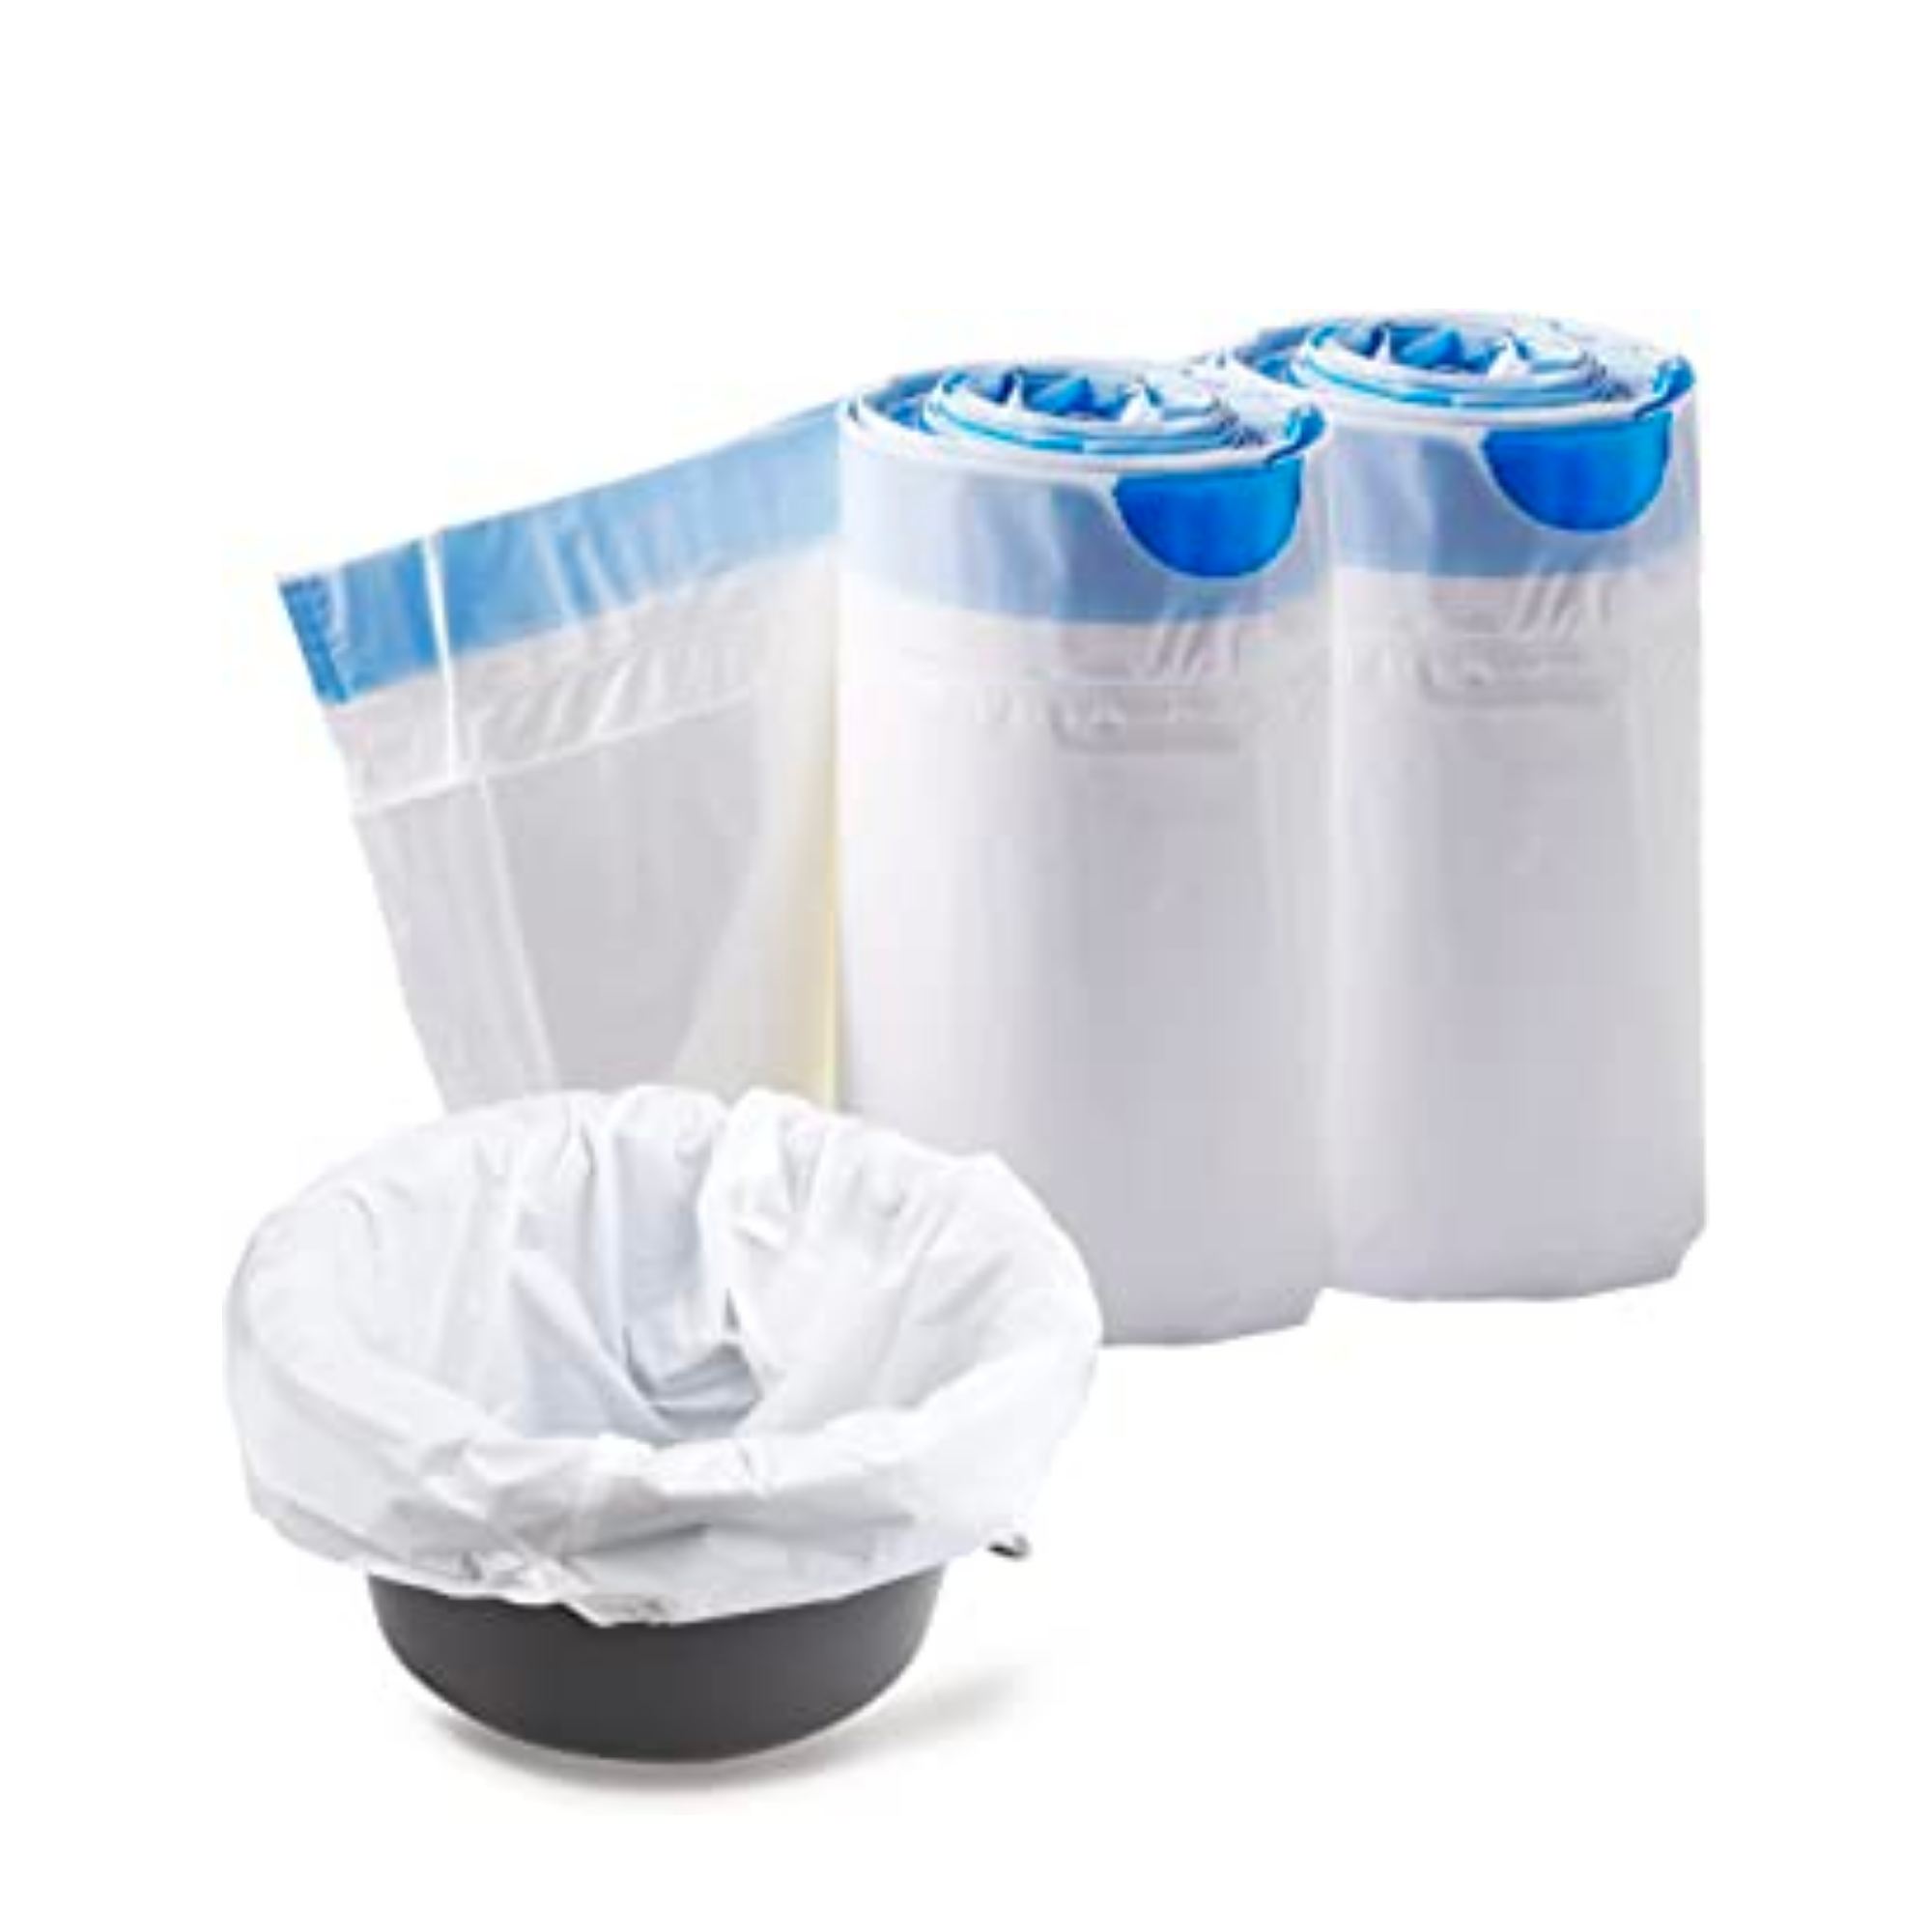 Hygienic Commode Liners with Absorbent Pad